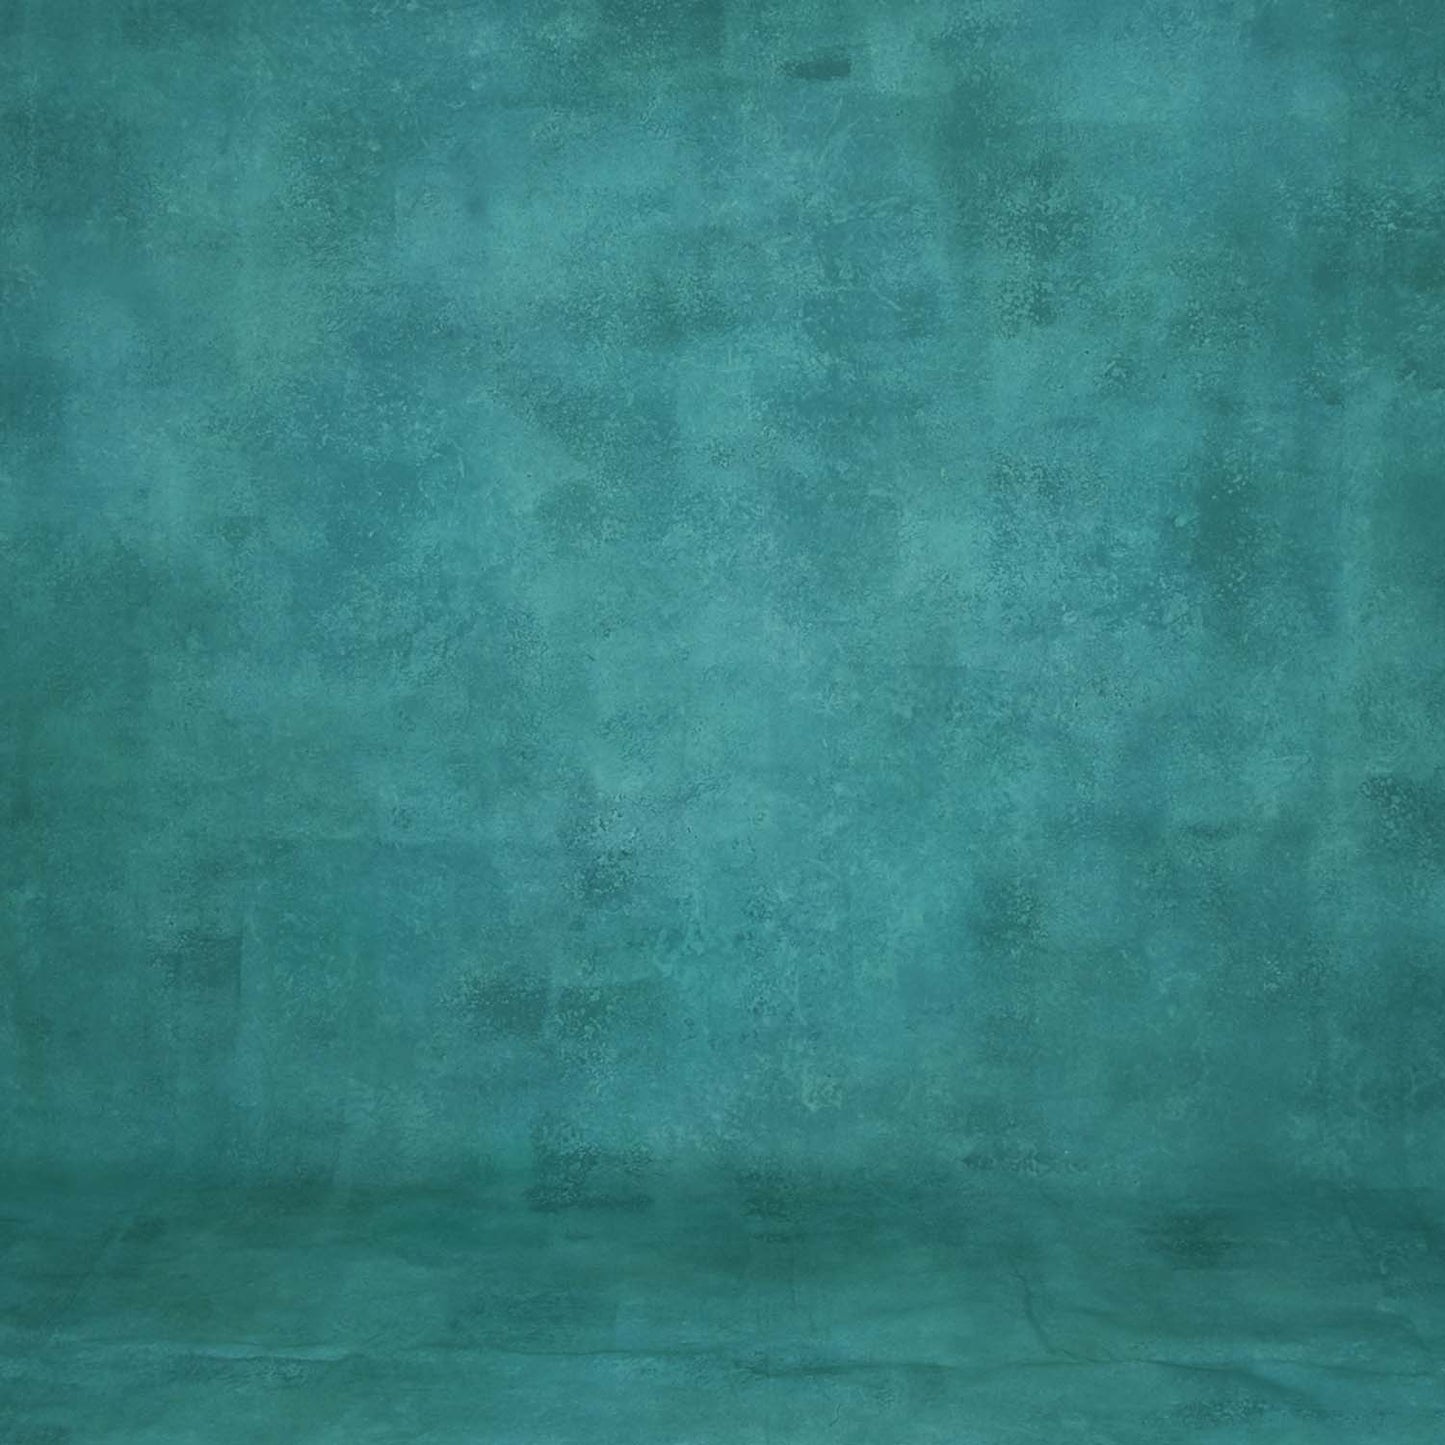 Canvas Turquoise Painted Backdrop 514